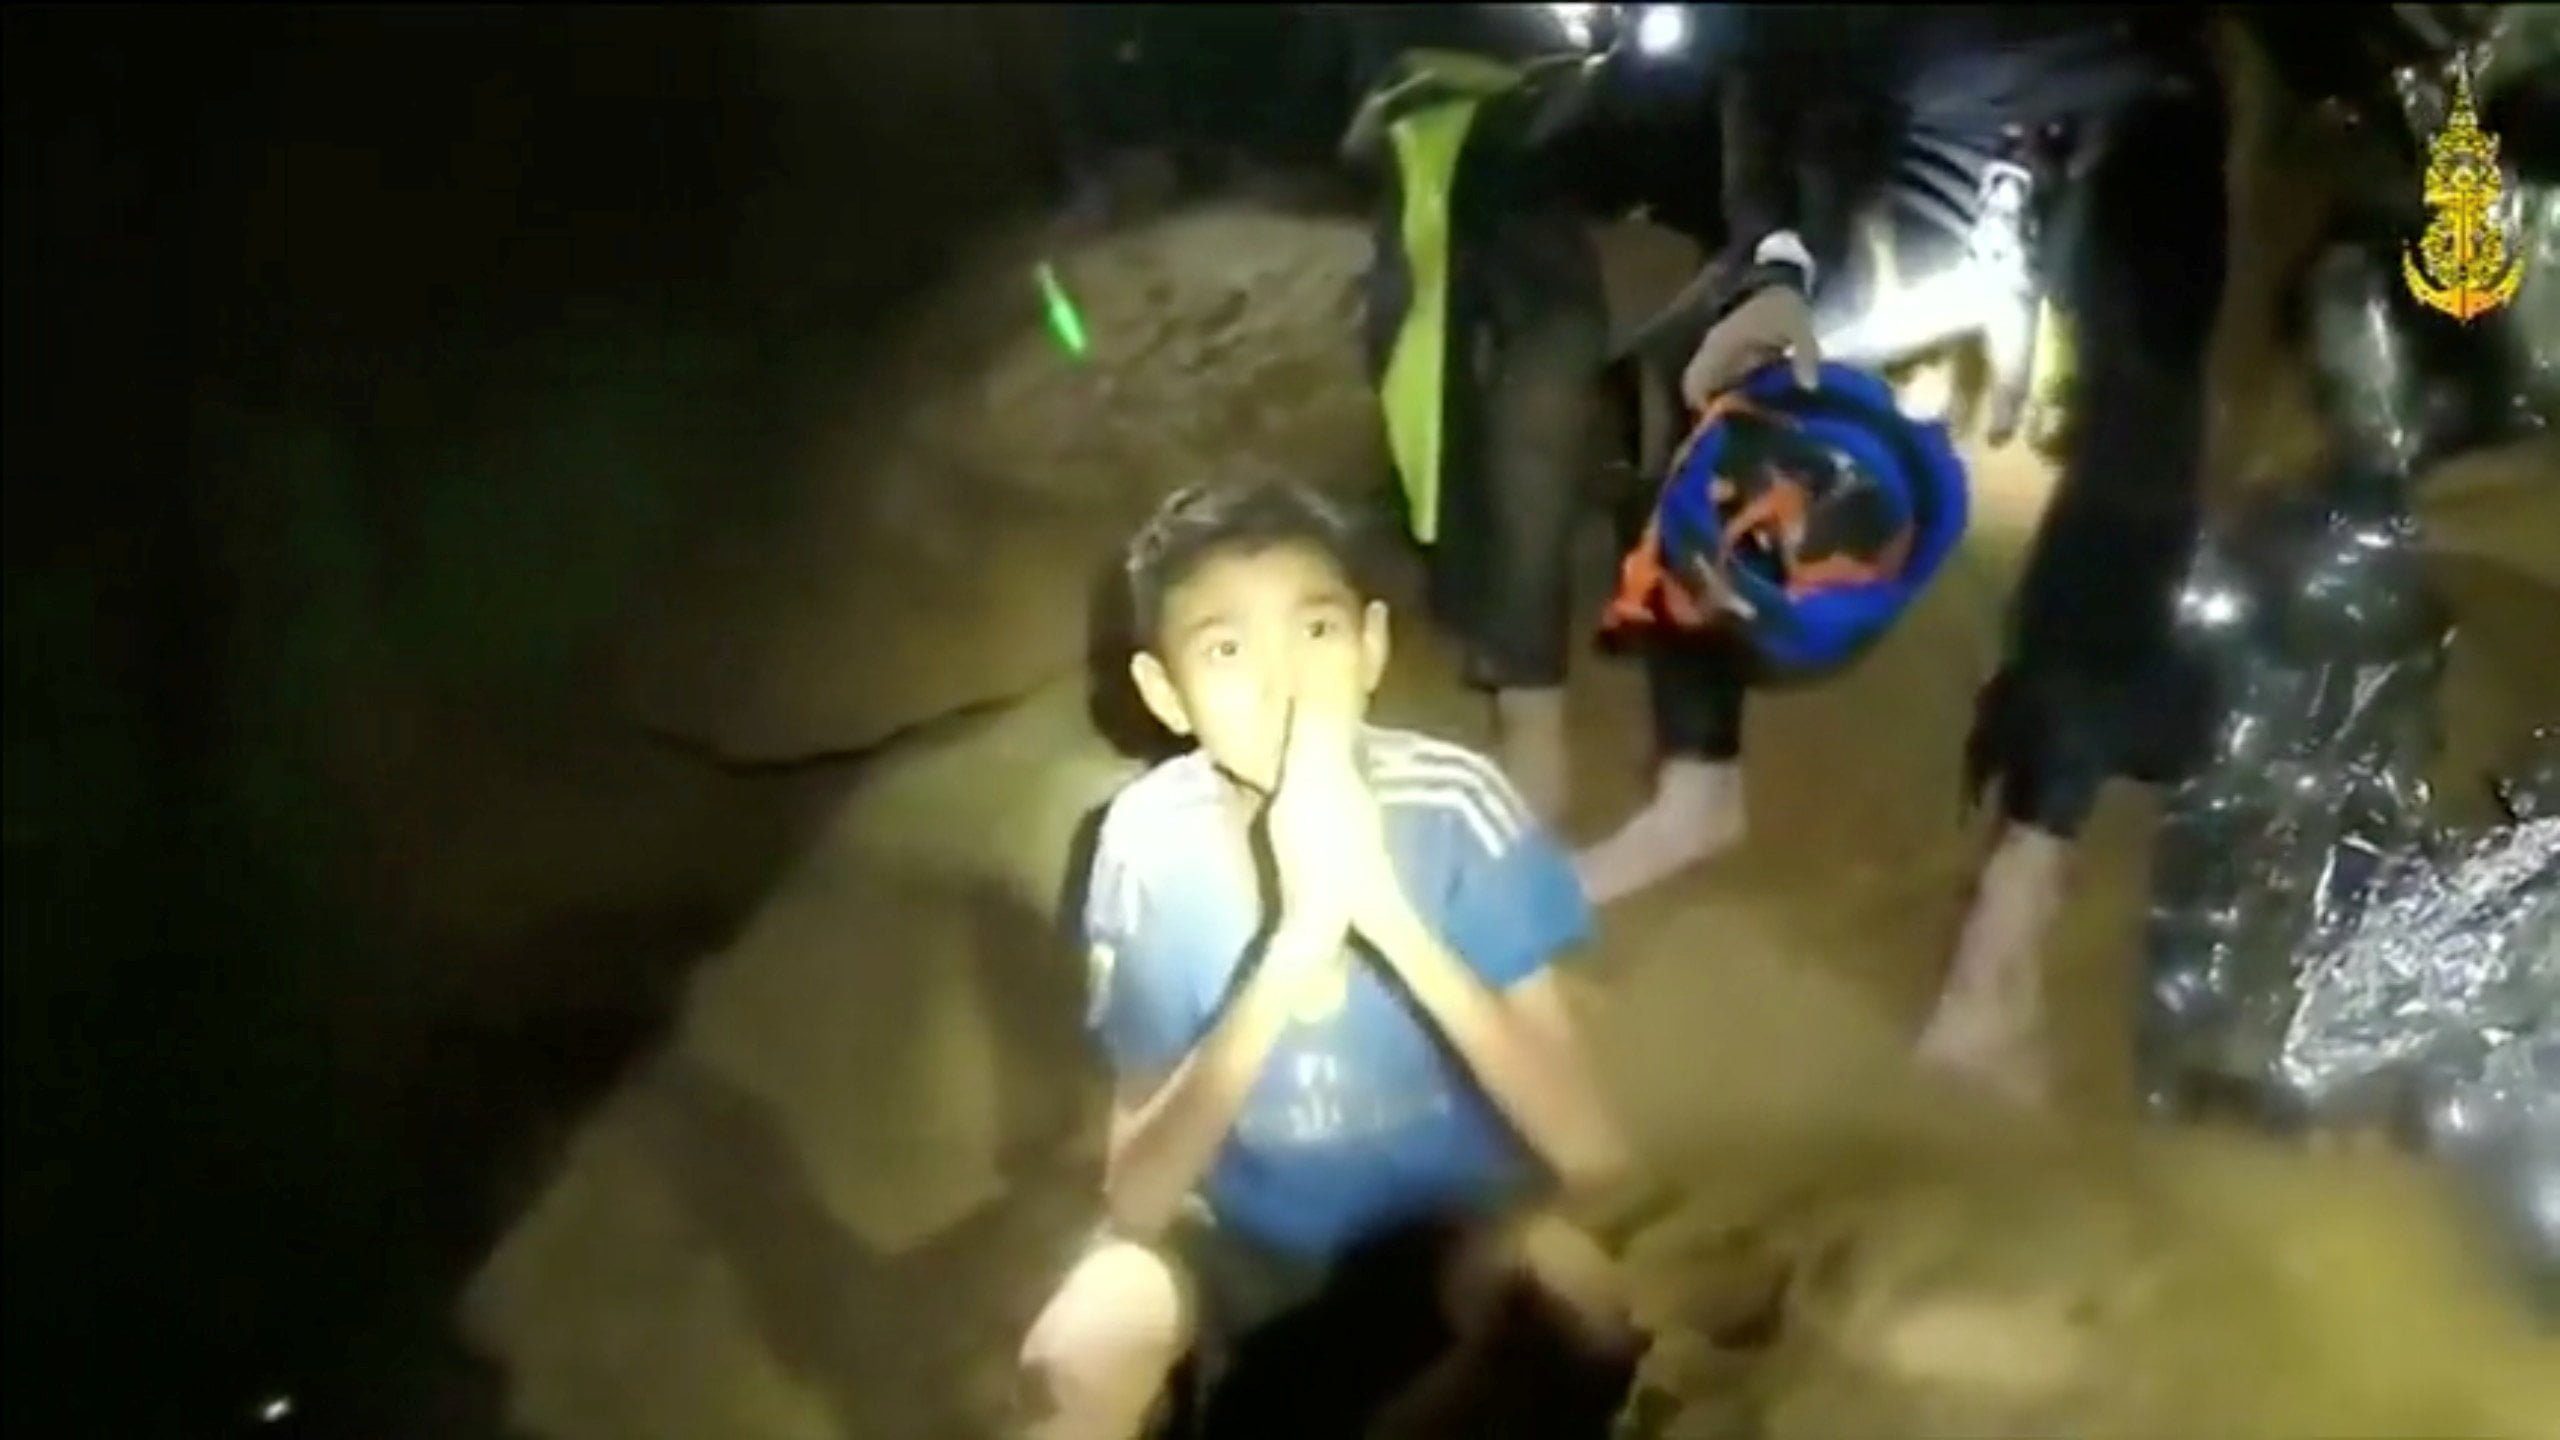 Boys from the under-16 soccer team trapped inside Tham Luang cave greet members of the Thai rescue team in Chiang Rai, Thailand